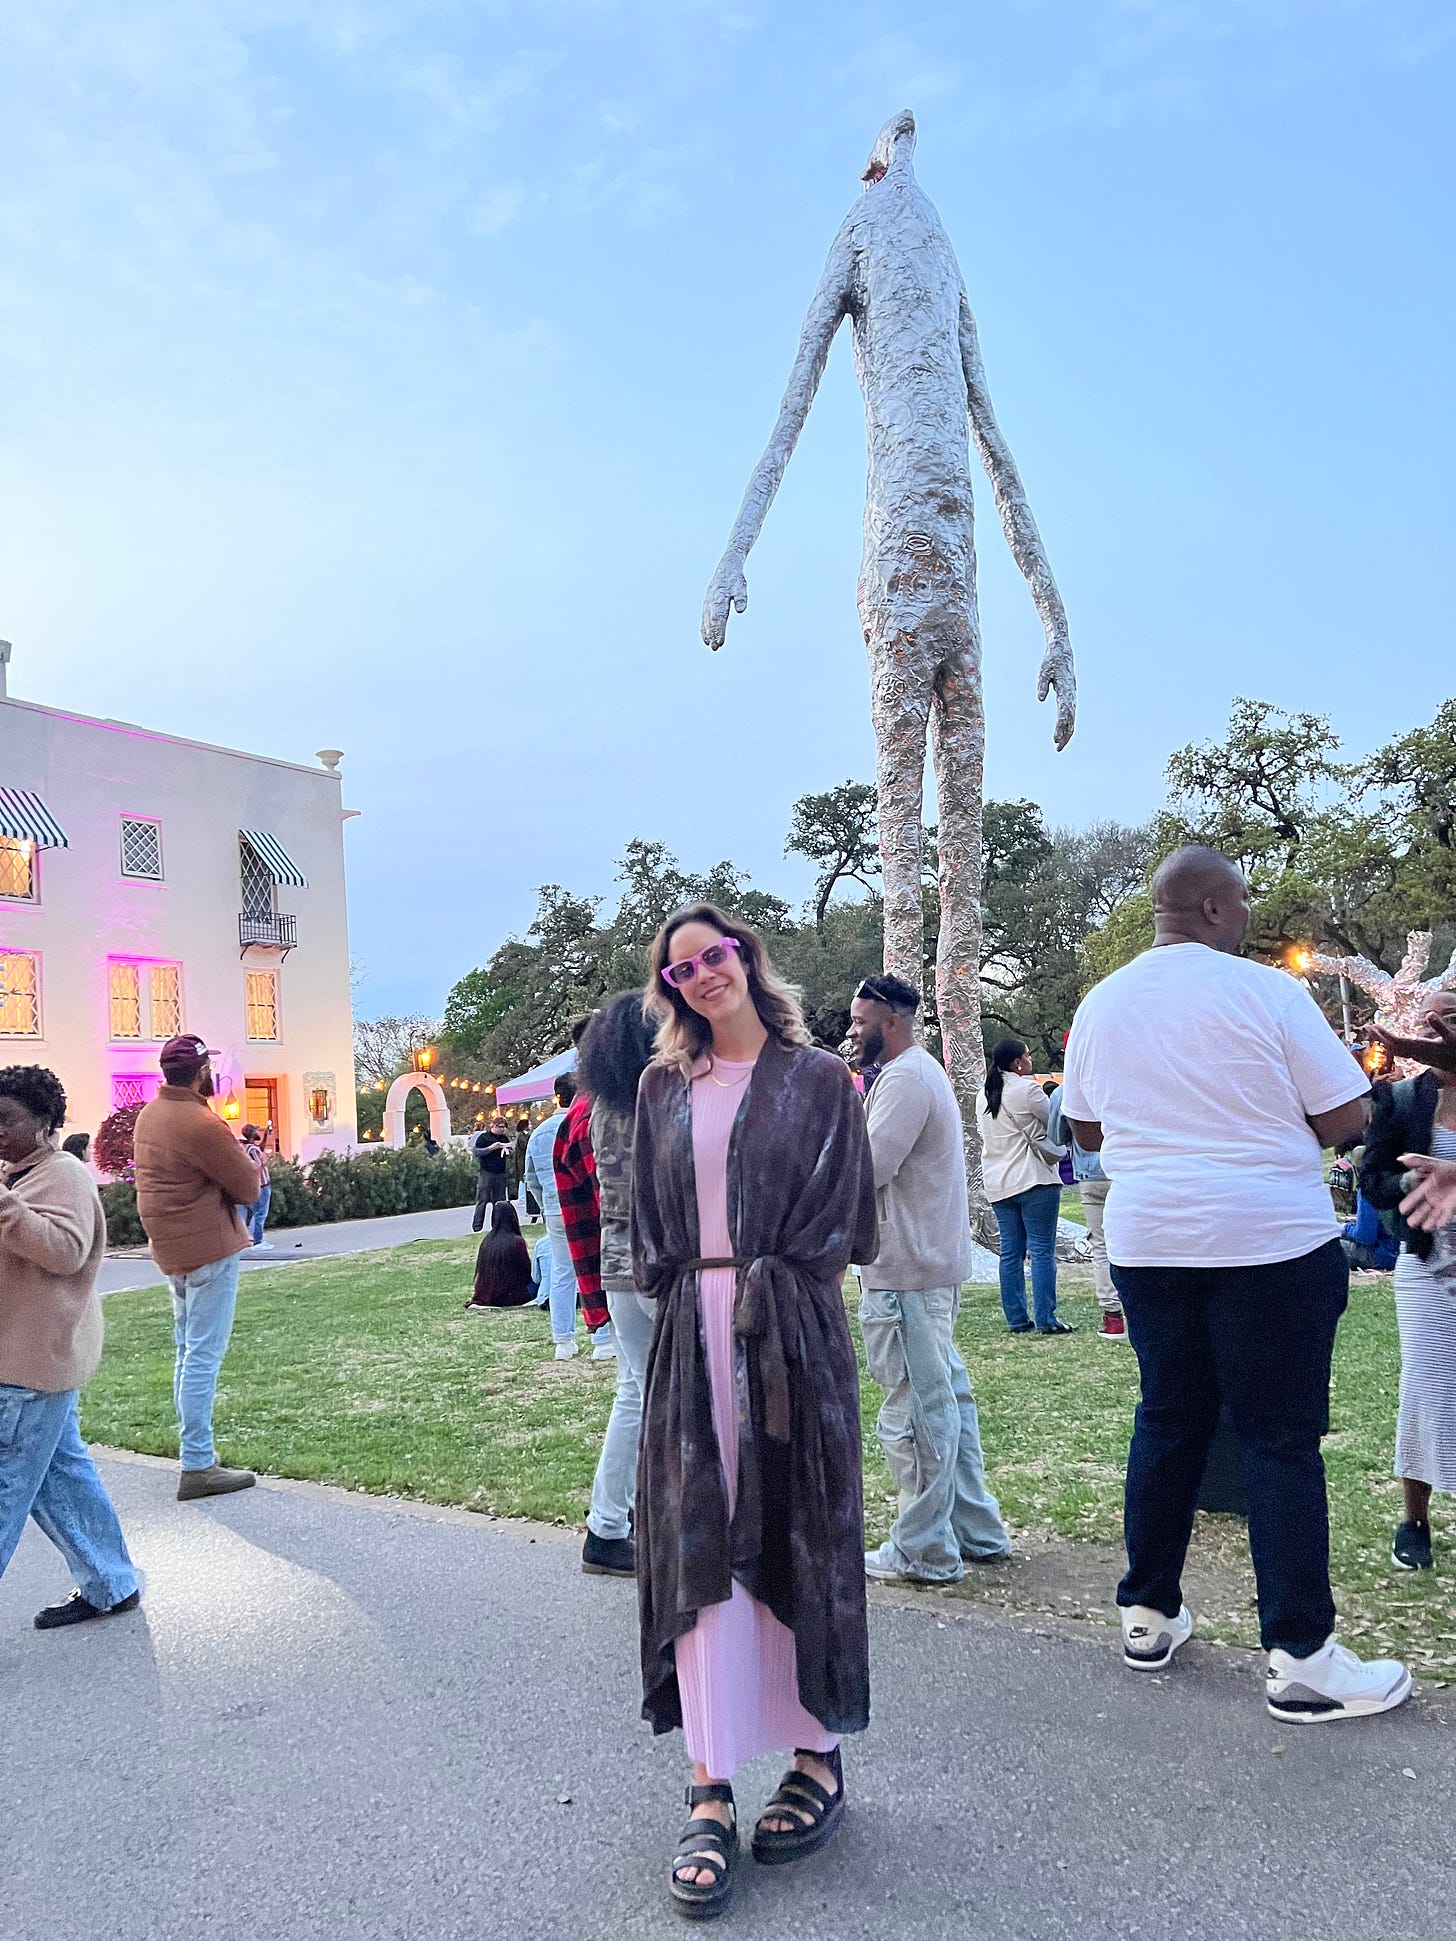 A white woman in a purple dress poses and smiles in front of a 20-foot-tall sculpture that looks like a silvery skinny alien man in front of a blue sky.